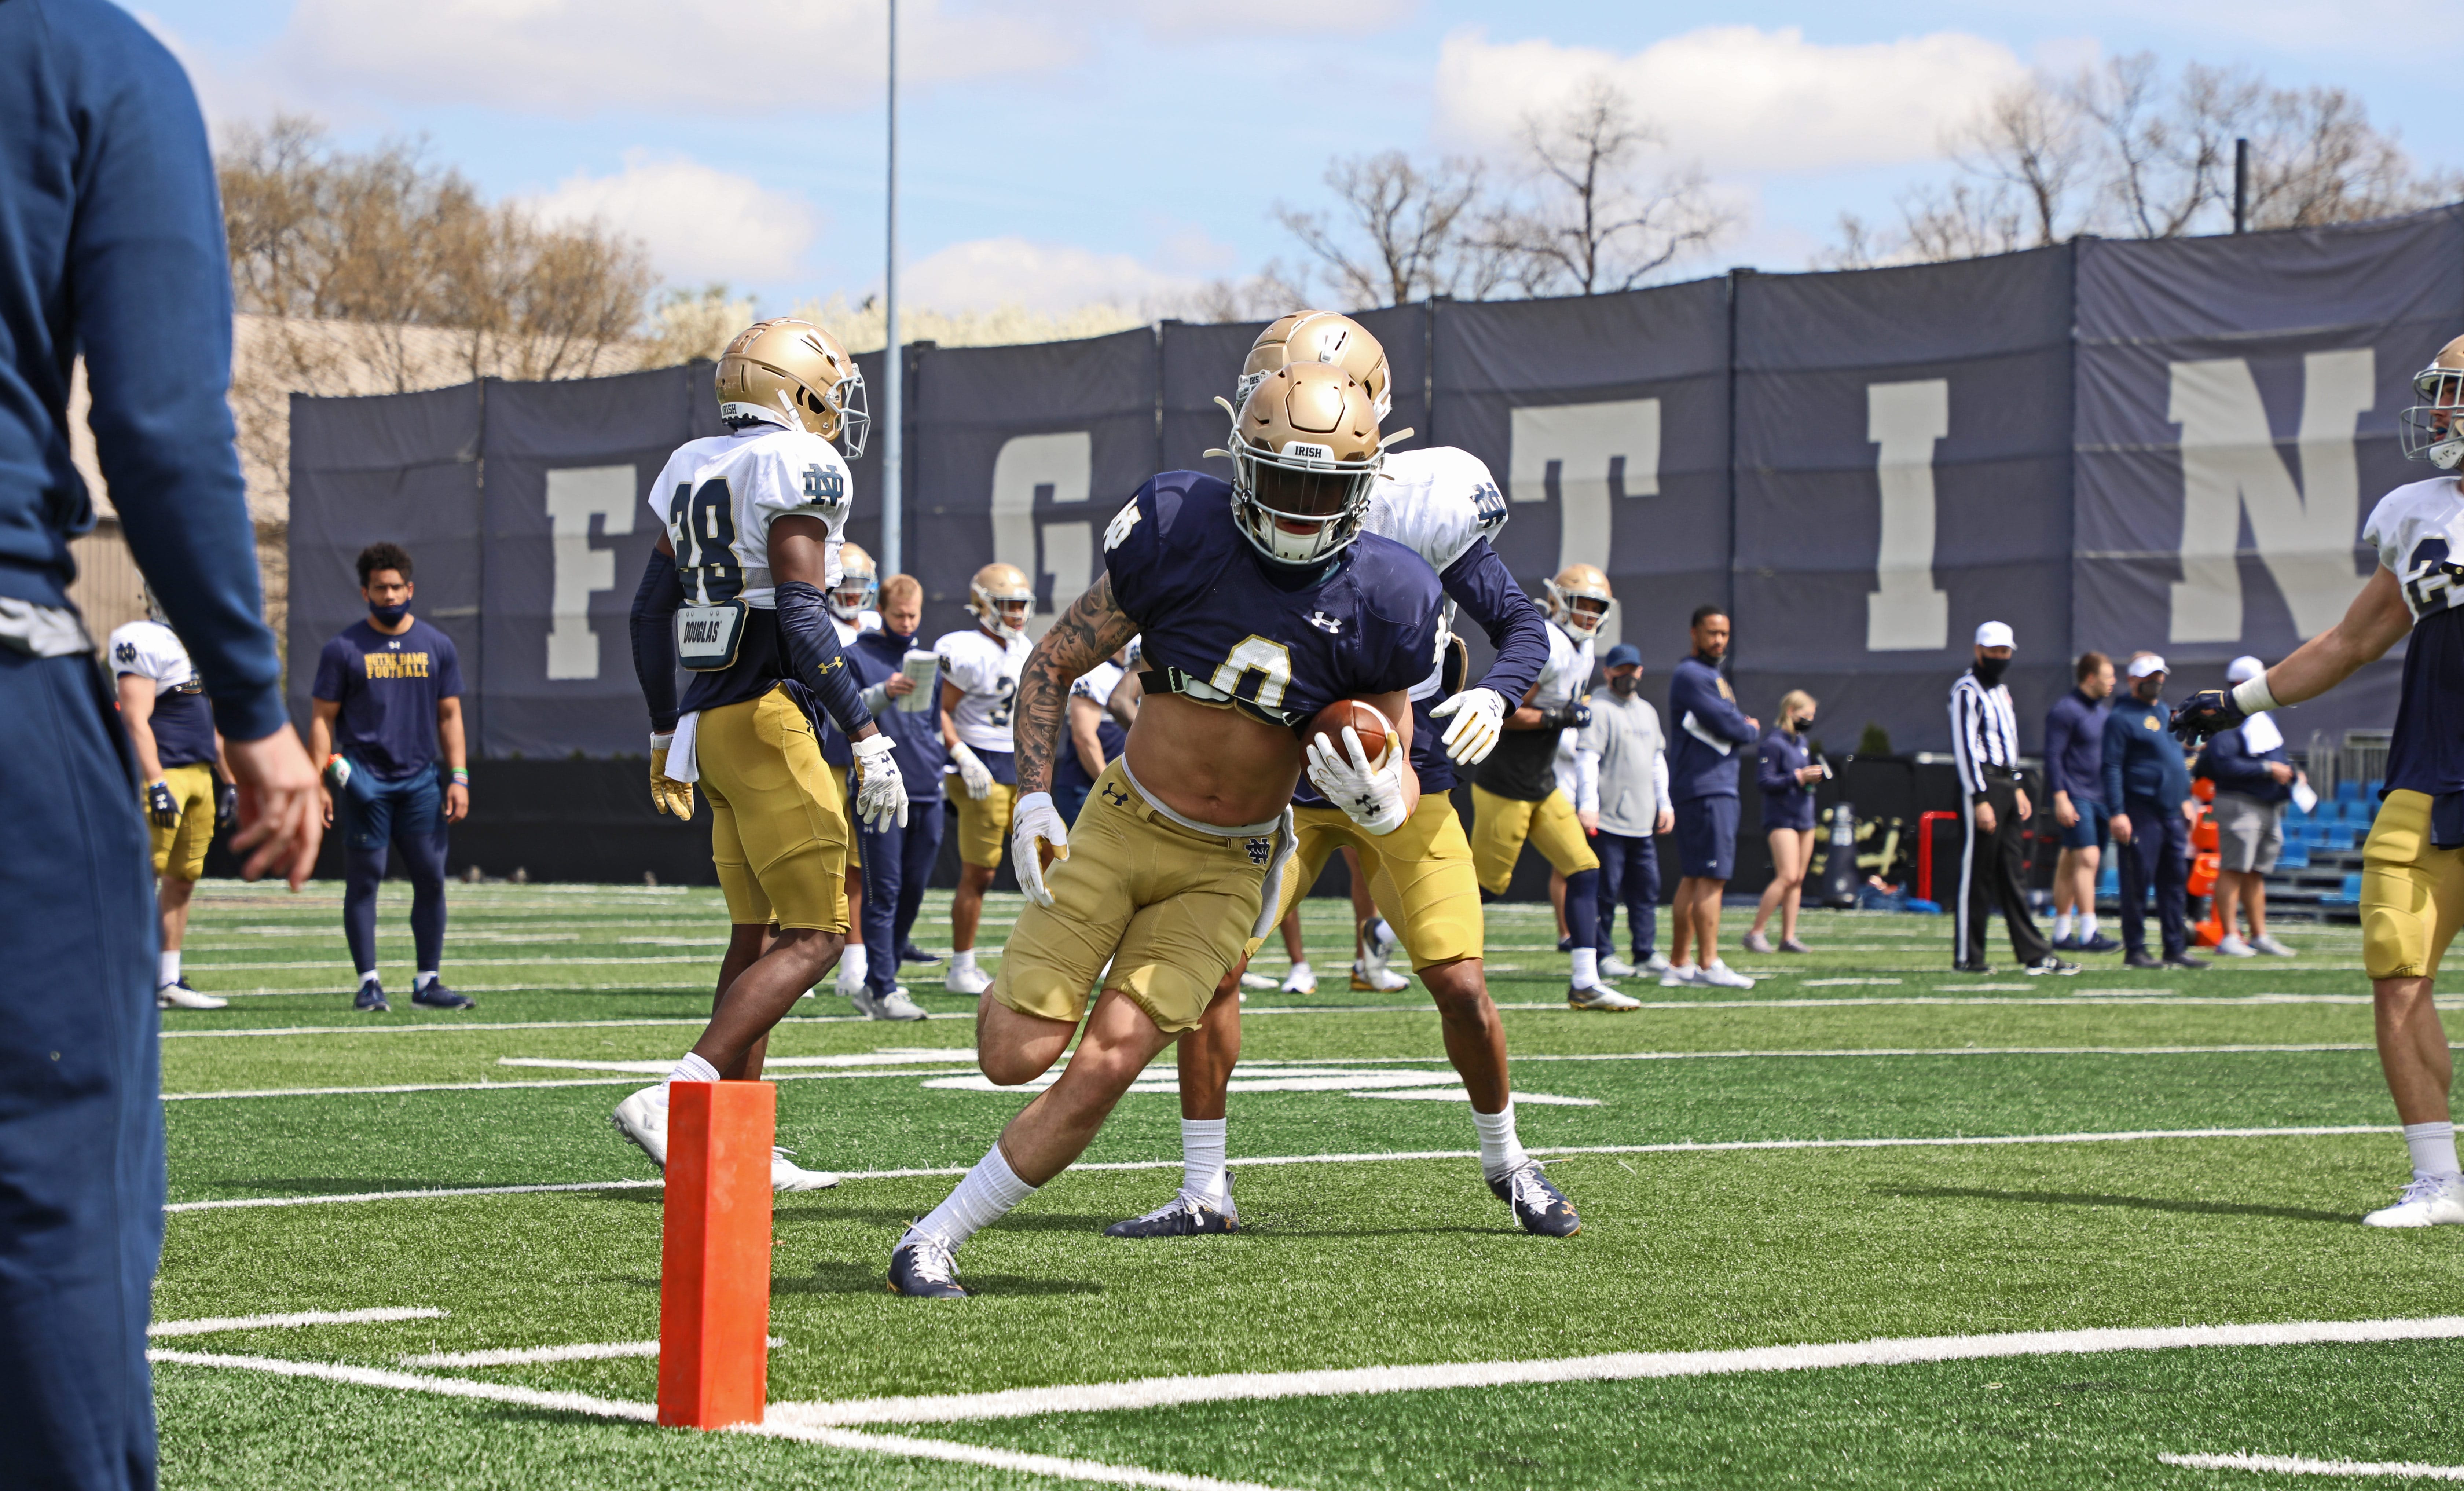 Notre Dame football: Why Riley Leonard is such a boost for Irish